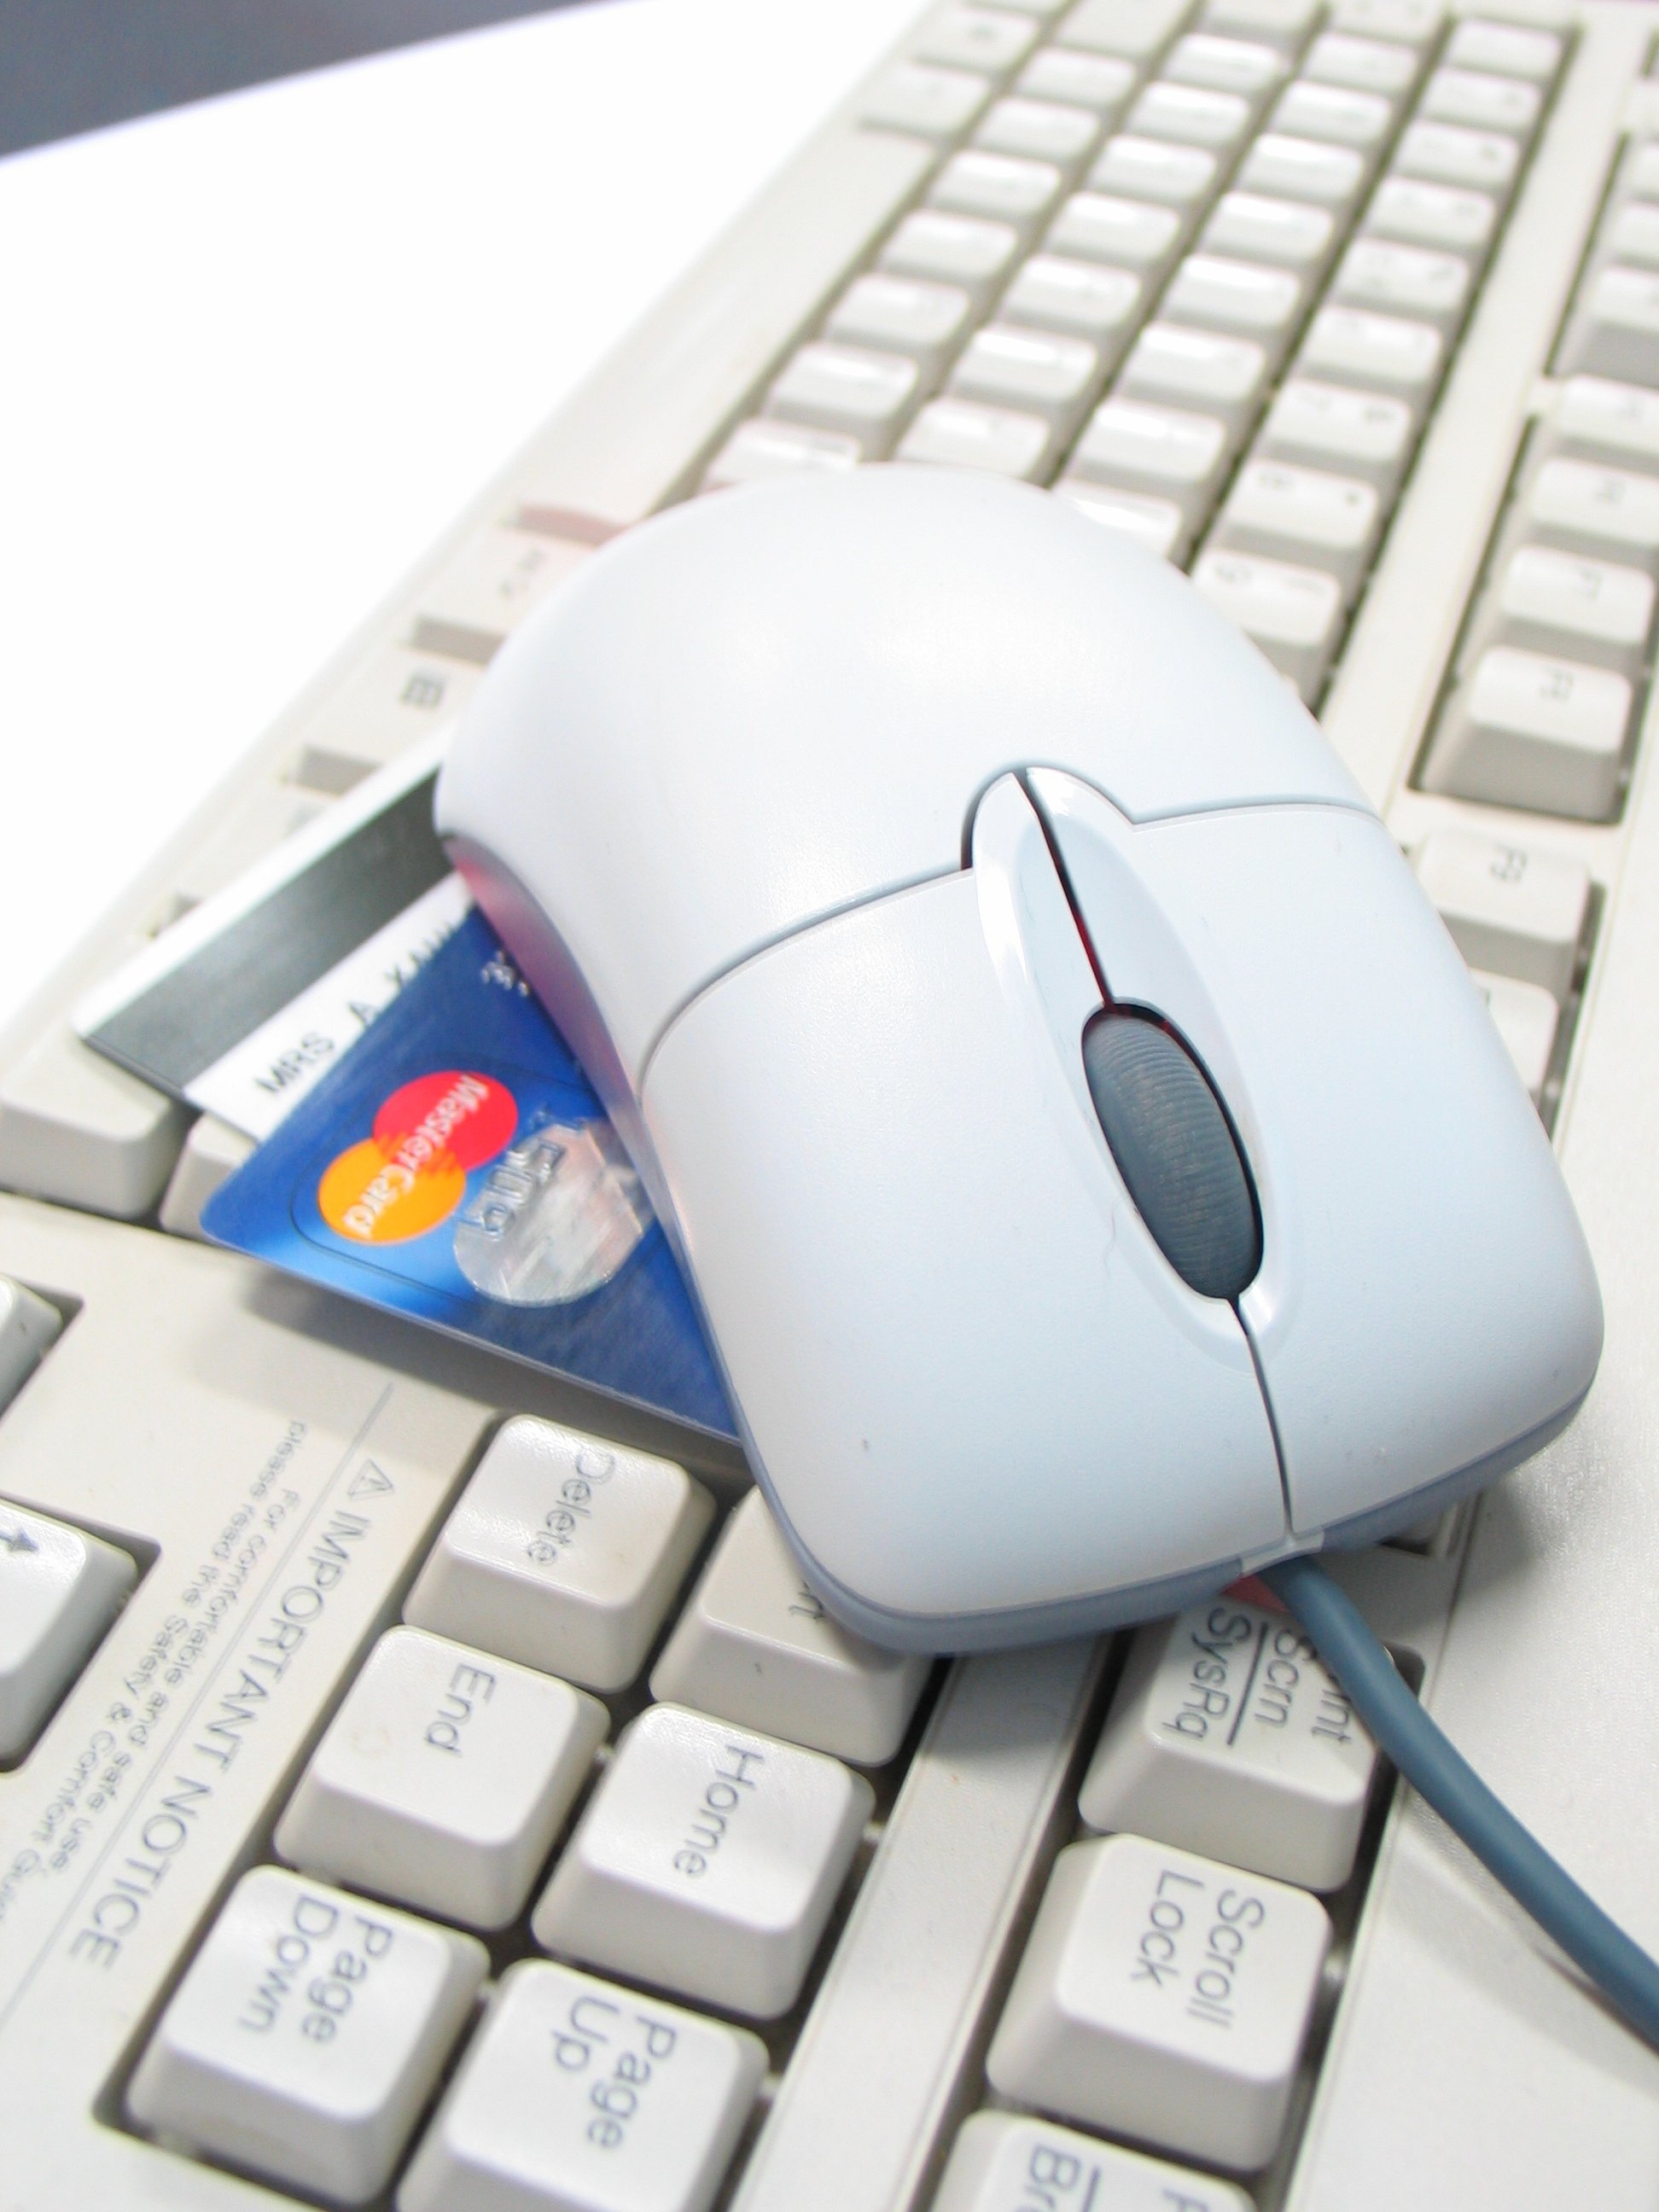 From The BSP Blog - Getting Started With NetSuite Credit Card Processing